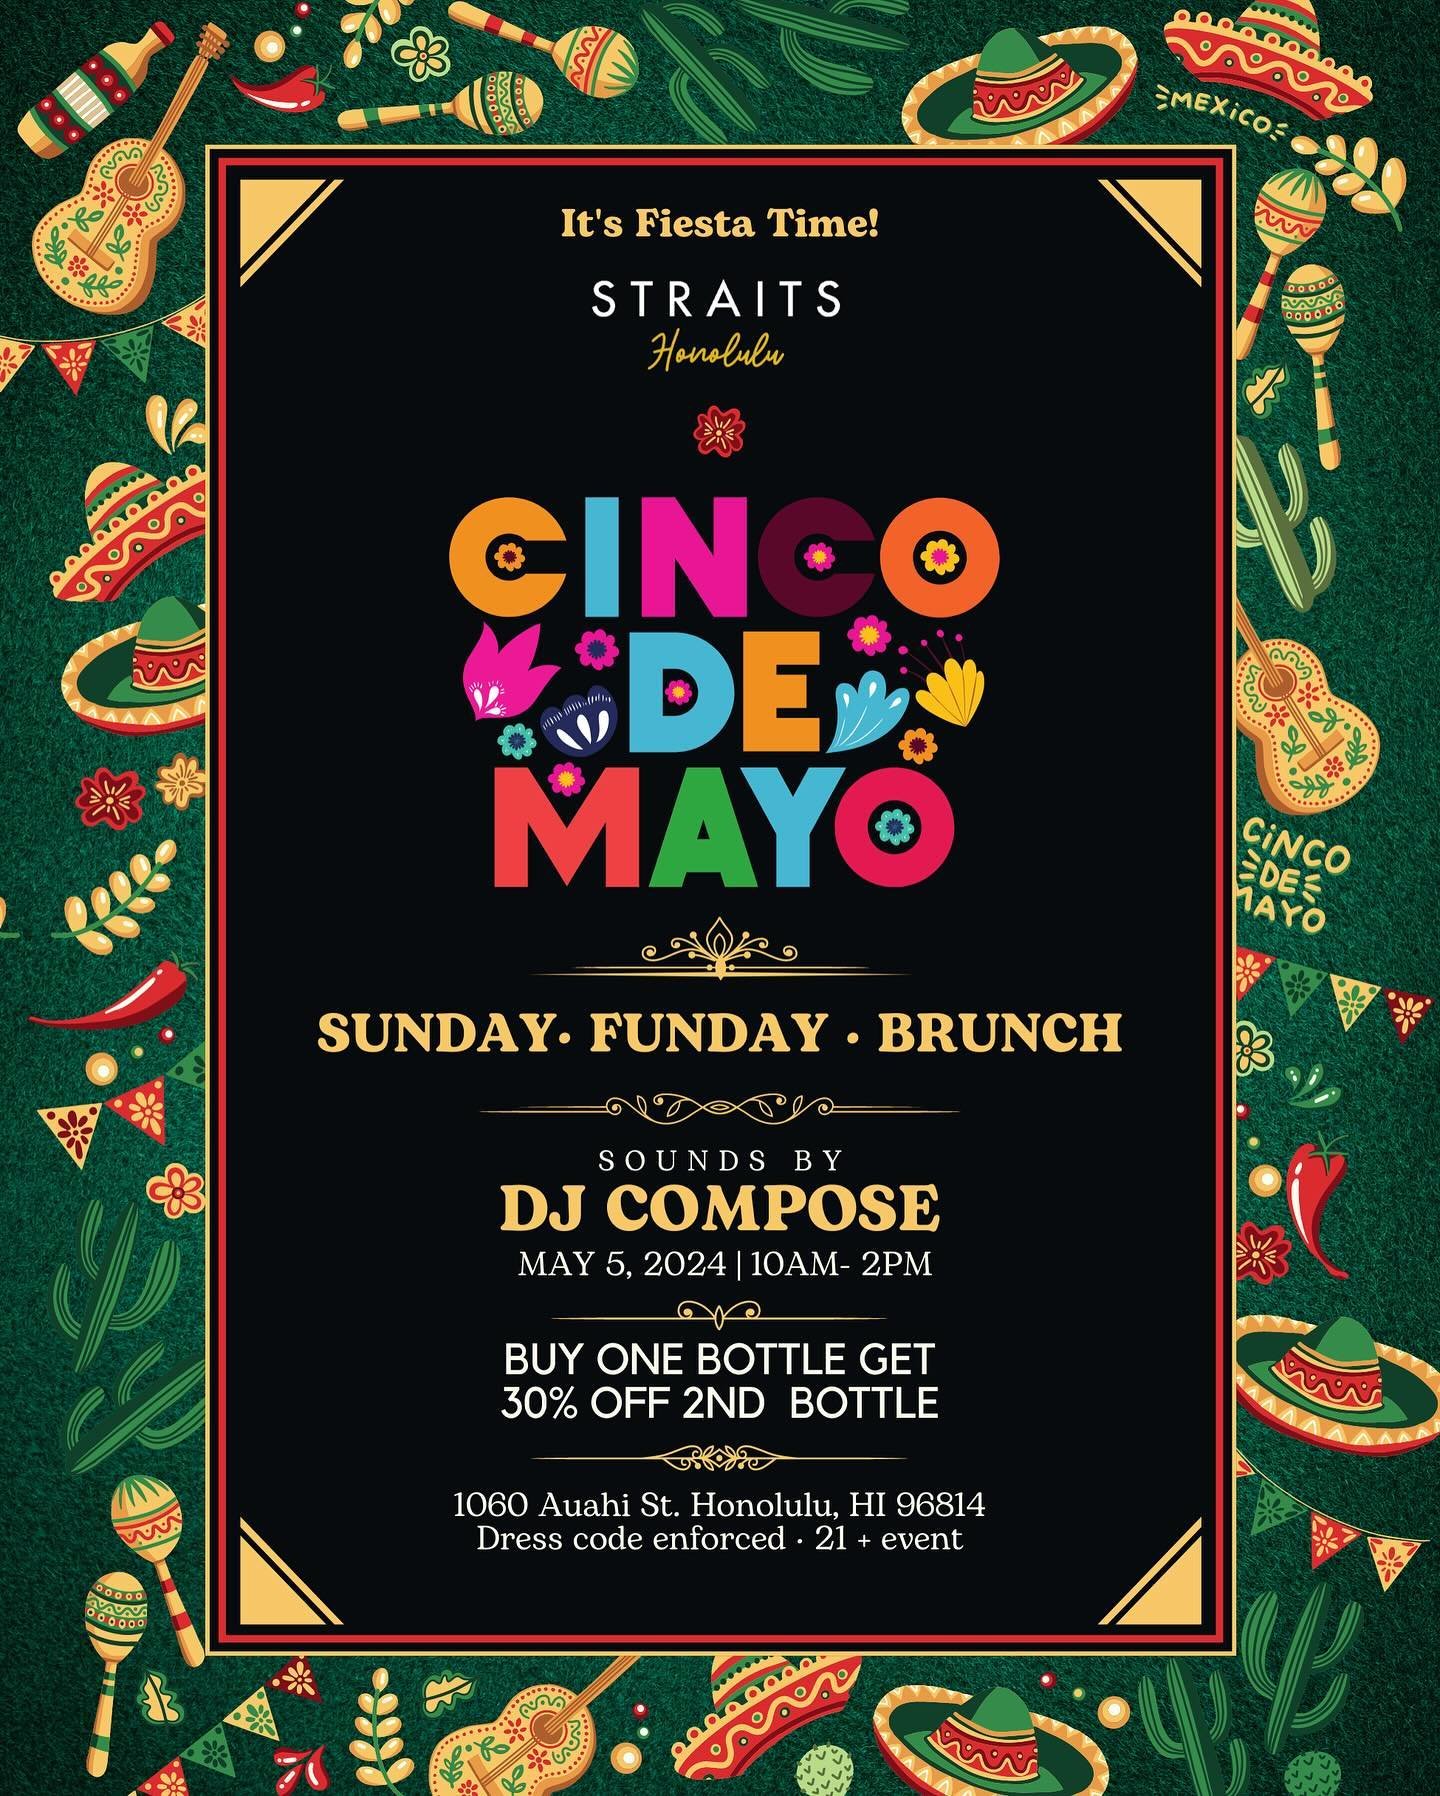 Spice up your Sunday Funday with our Cinco De Mayo Fiesta &bull; Join us for a brunch filled with good food, drinks, and music by @dj_compose 🎉🍹🎶🌮 

Bottle specials: Buy one bottle get 30% off the 2nd bottle